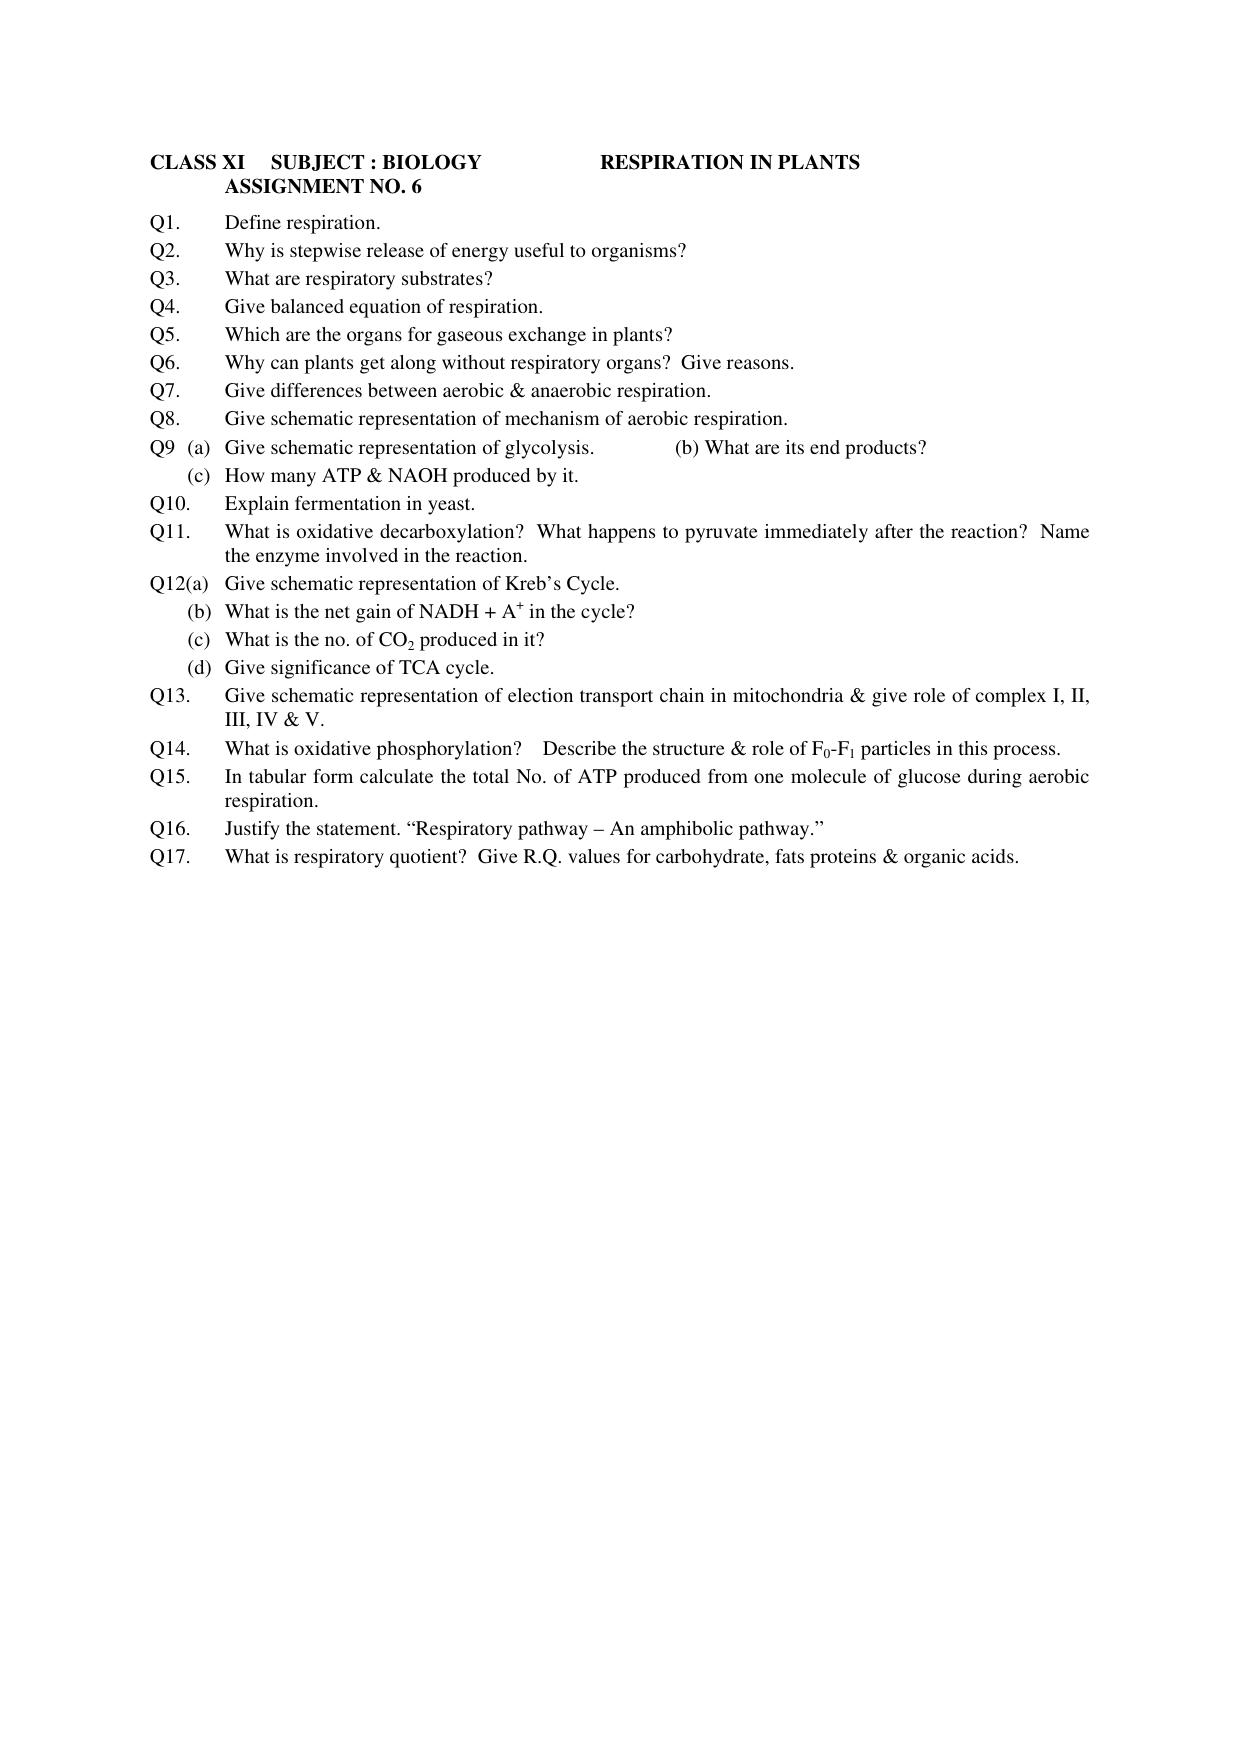 CBSE Worksheets for Class 11 Biology Assignment 6 - Page 1